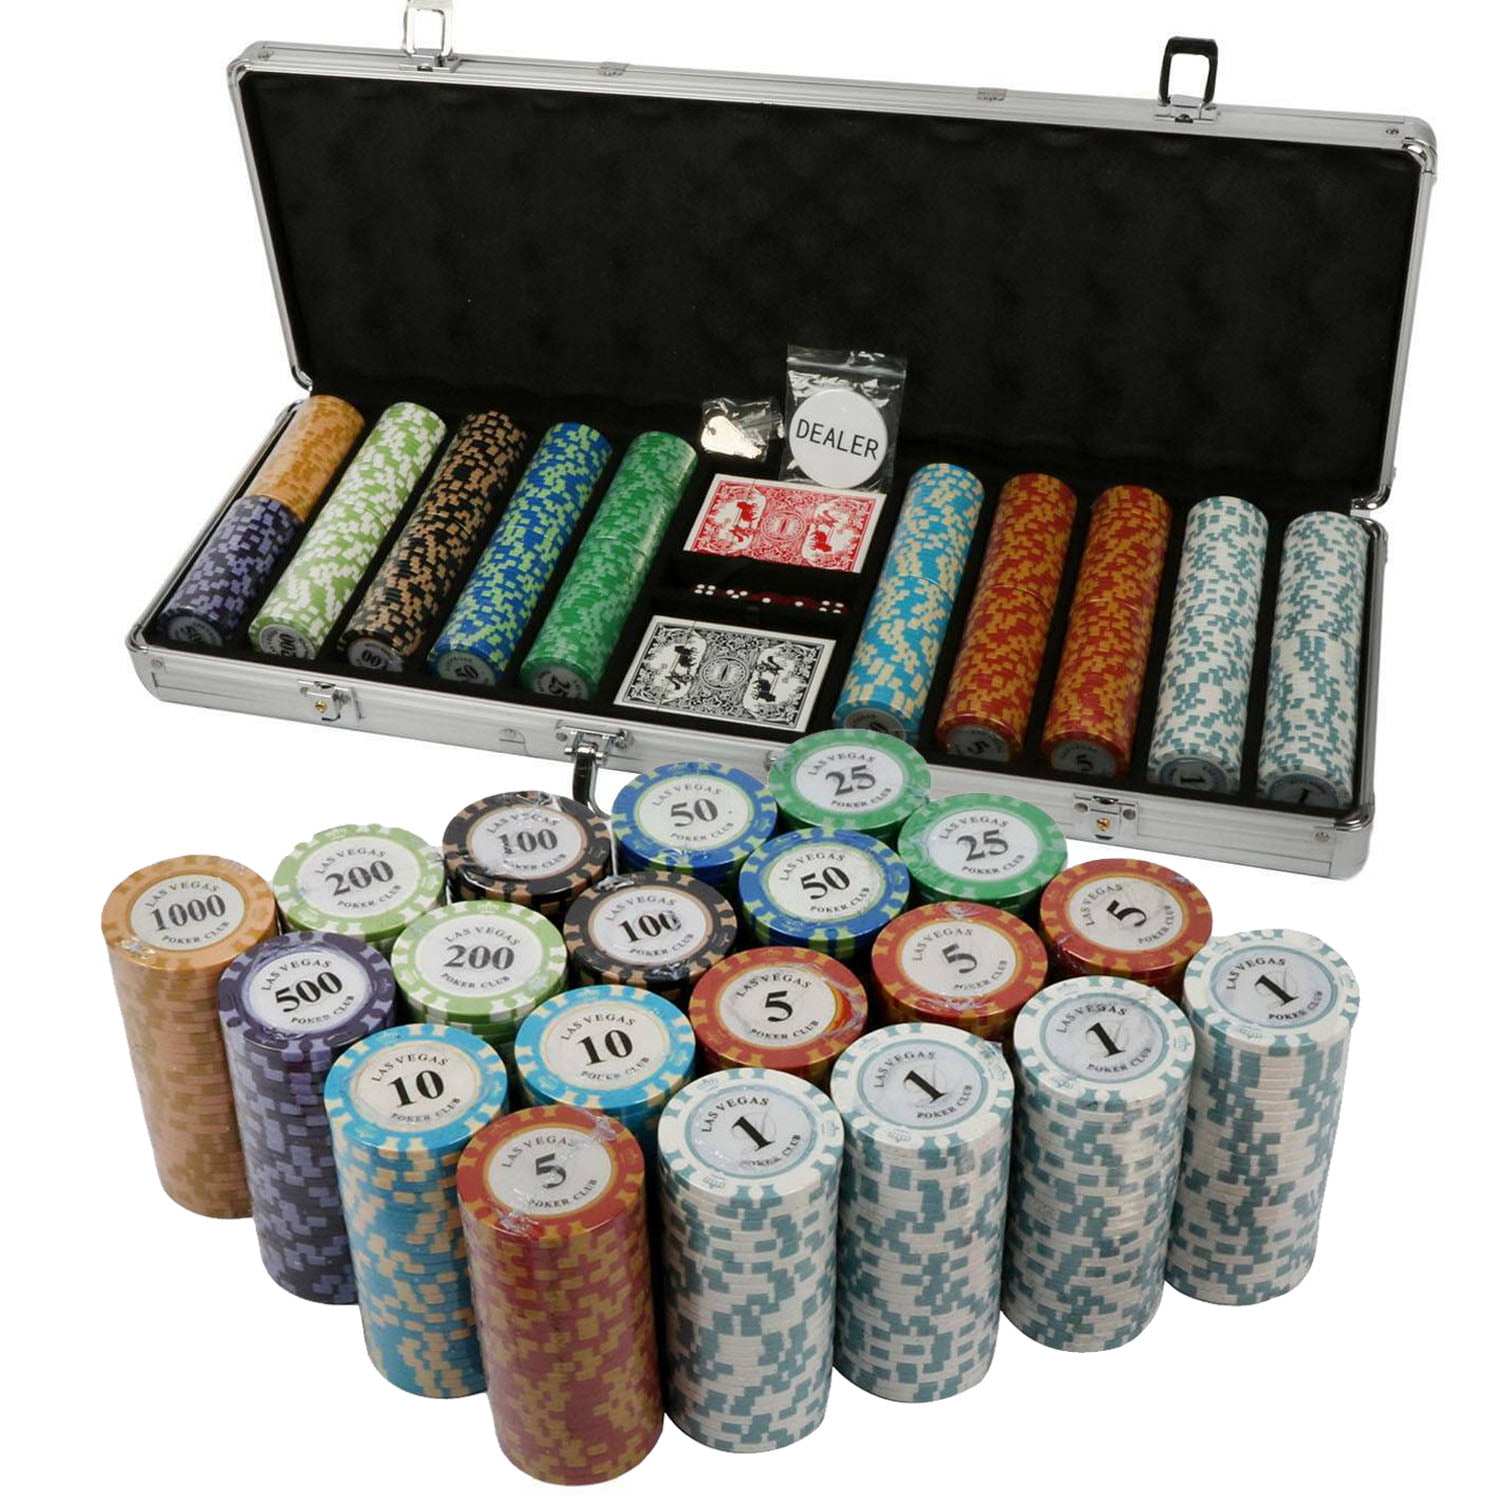 25 ct Red $5 Five Dollars "Ultimate" Series 14g Poker Chips Laser Graphics 